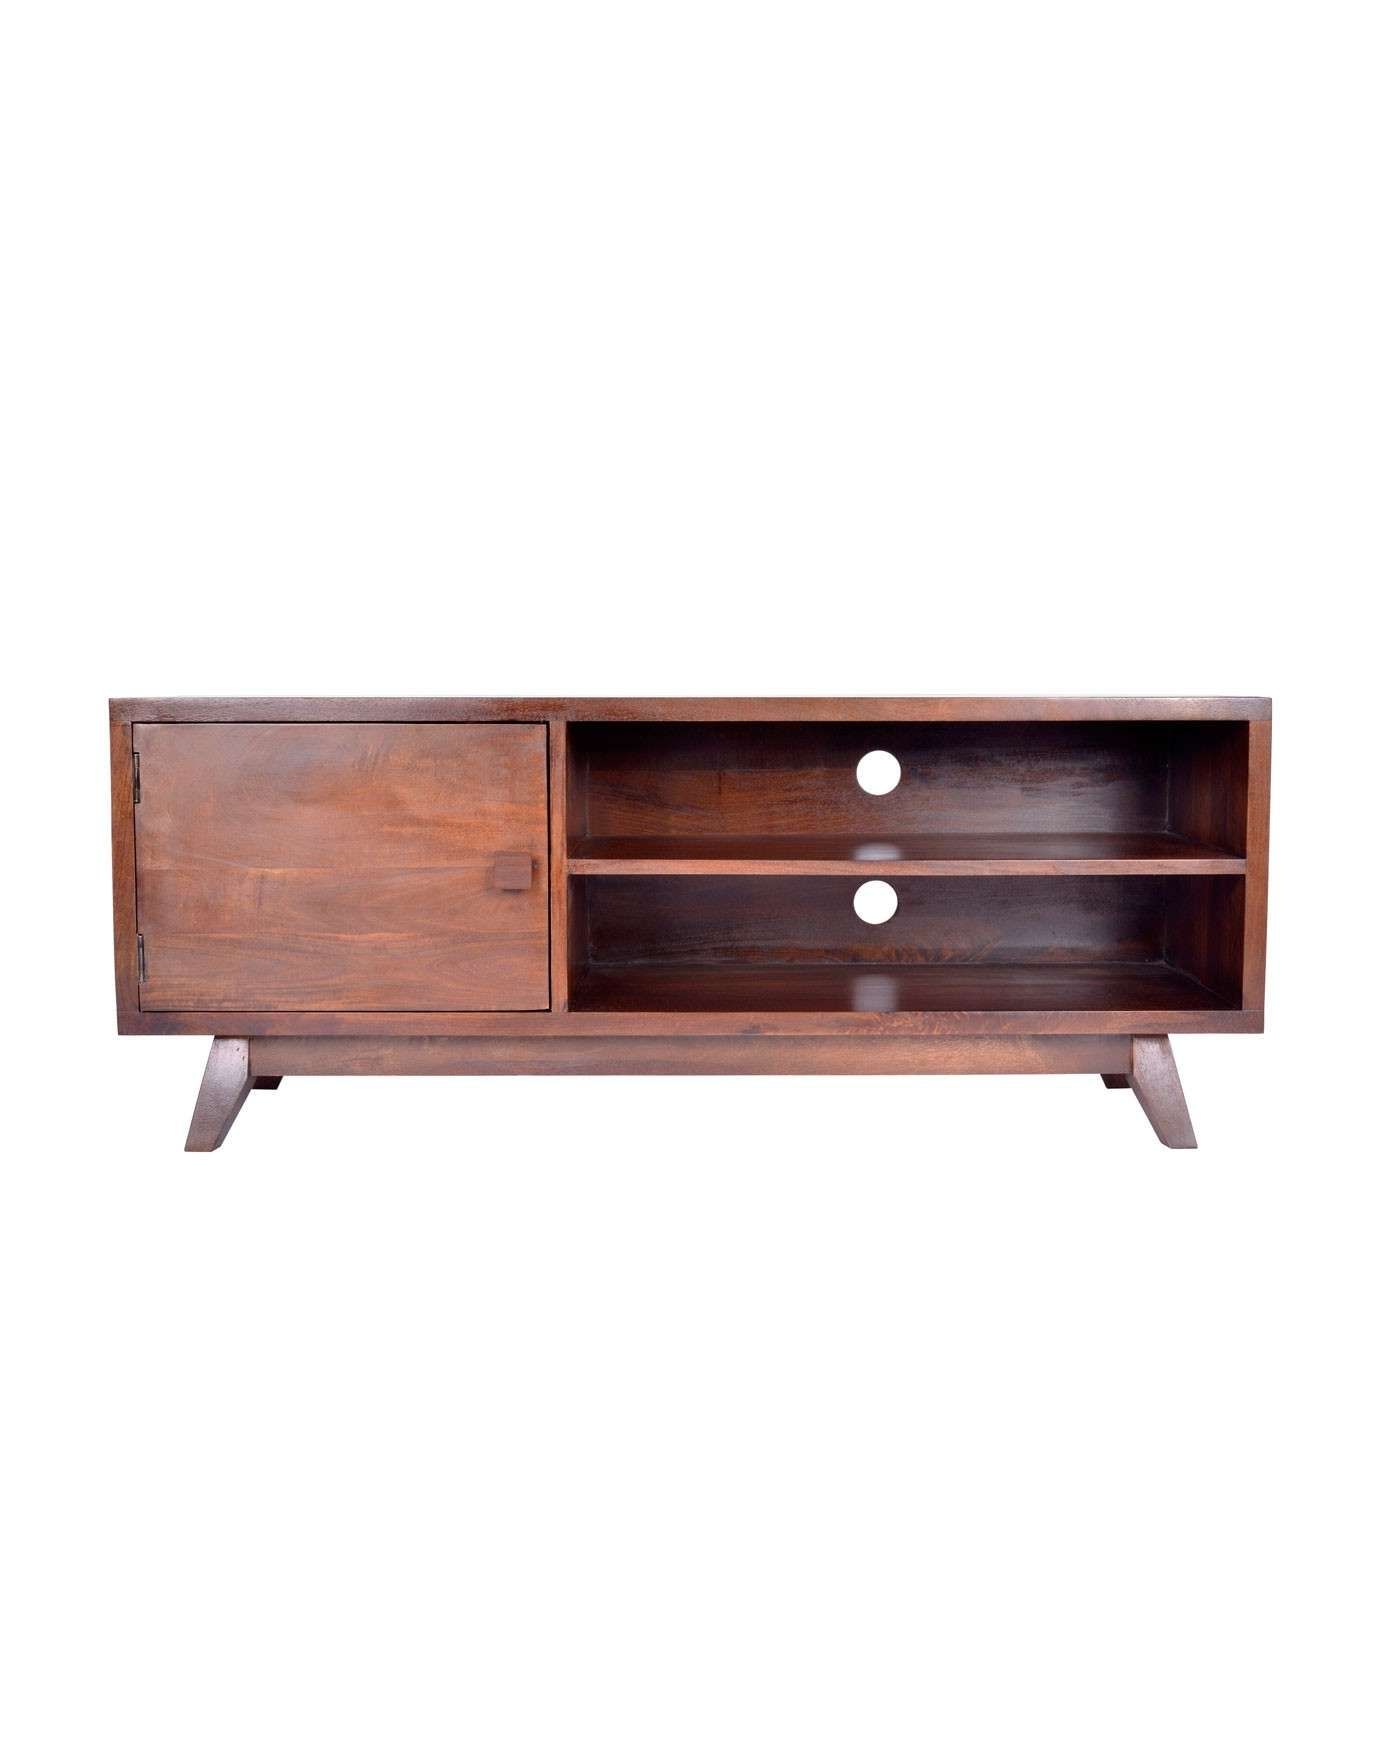 Dark Wood Tv Stand With Shelf Retro Design 100% Solid Wood Pertaining To Dark Tv Stands (Gallery 13 of 15)